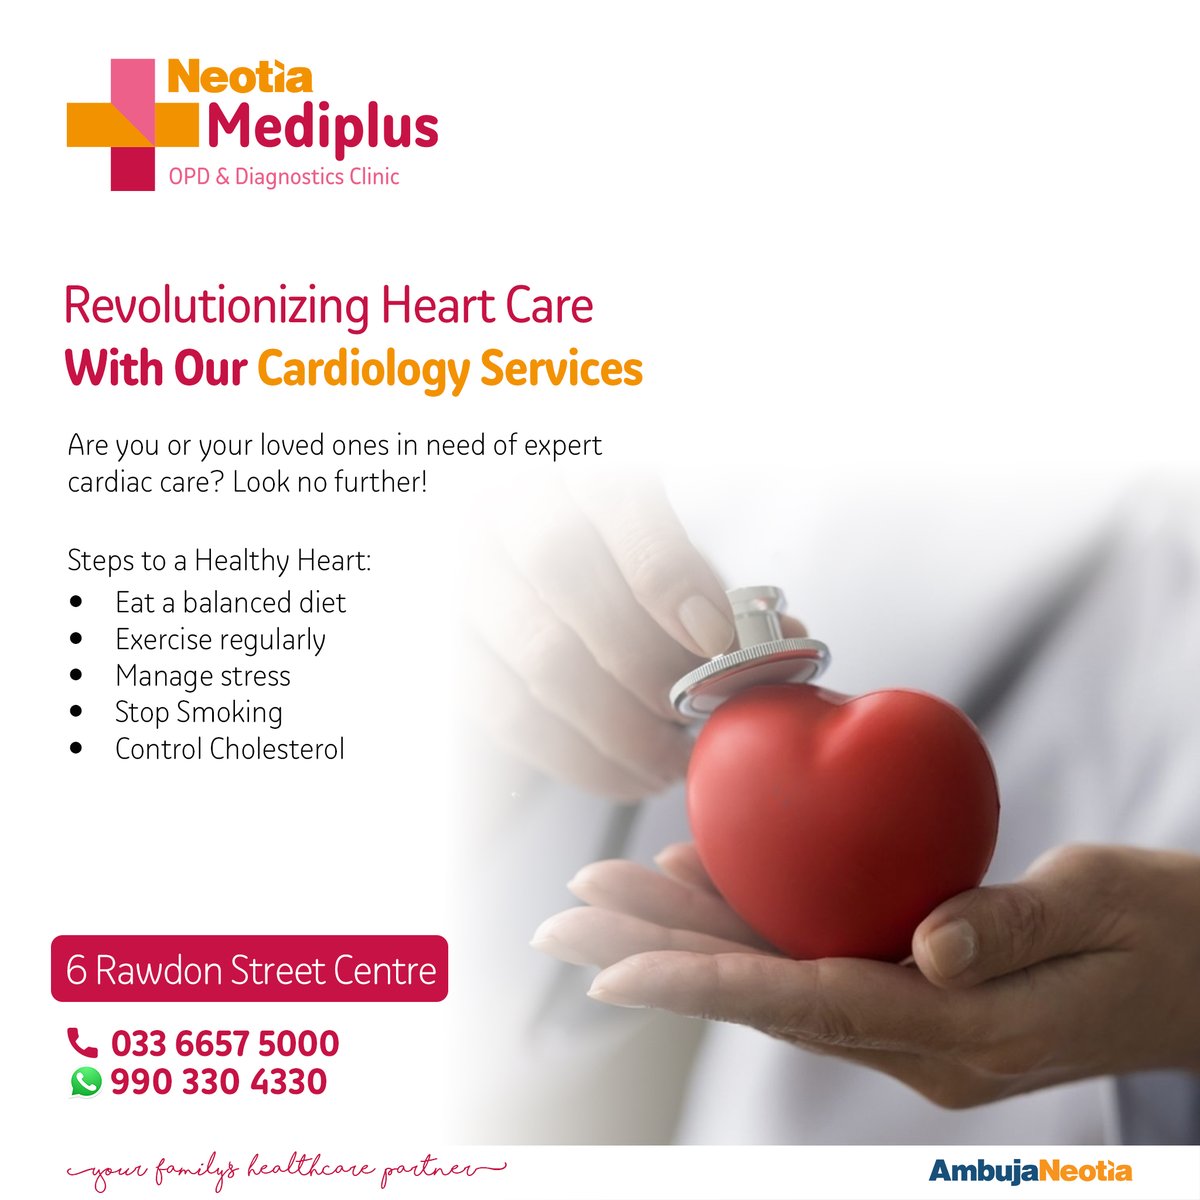 Worried about heart health? Don't ignore symptoms like chest pain, breathlessness or irregular heartbeats!Our expert cardiologists at Neotia Mediplus offer tailored care to keep your heart strong. Book your appointment today! #HeartHealth #Cardiology #NeotiaMediplus #AmbujaNeotia